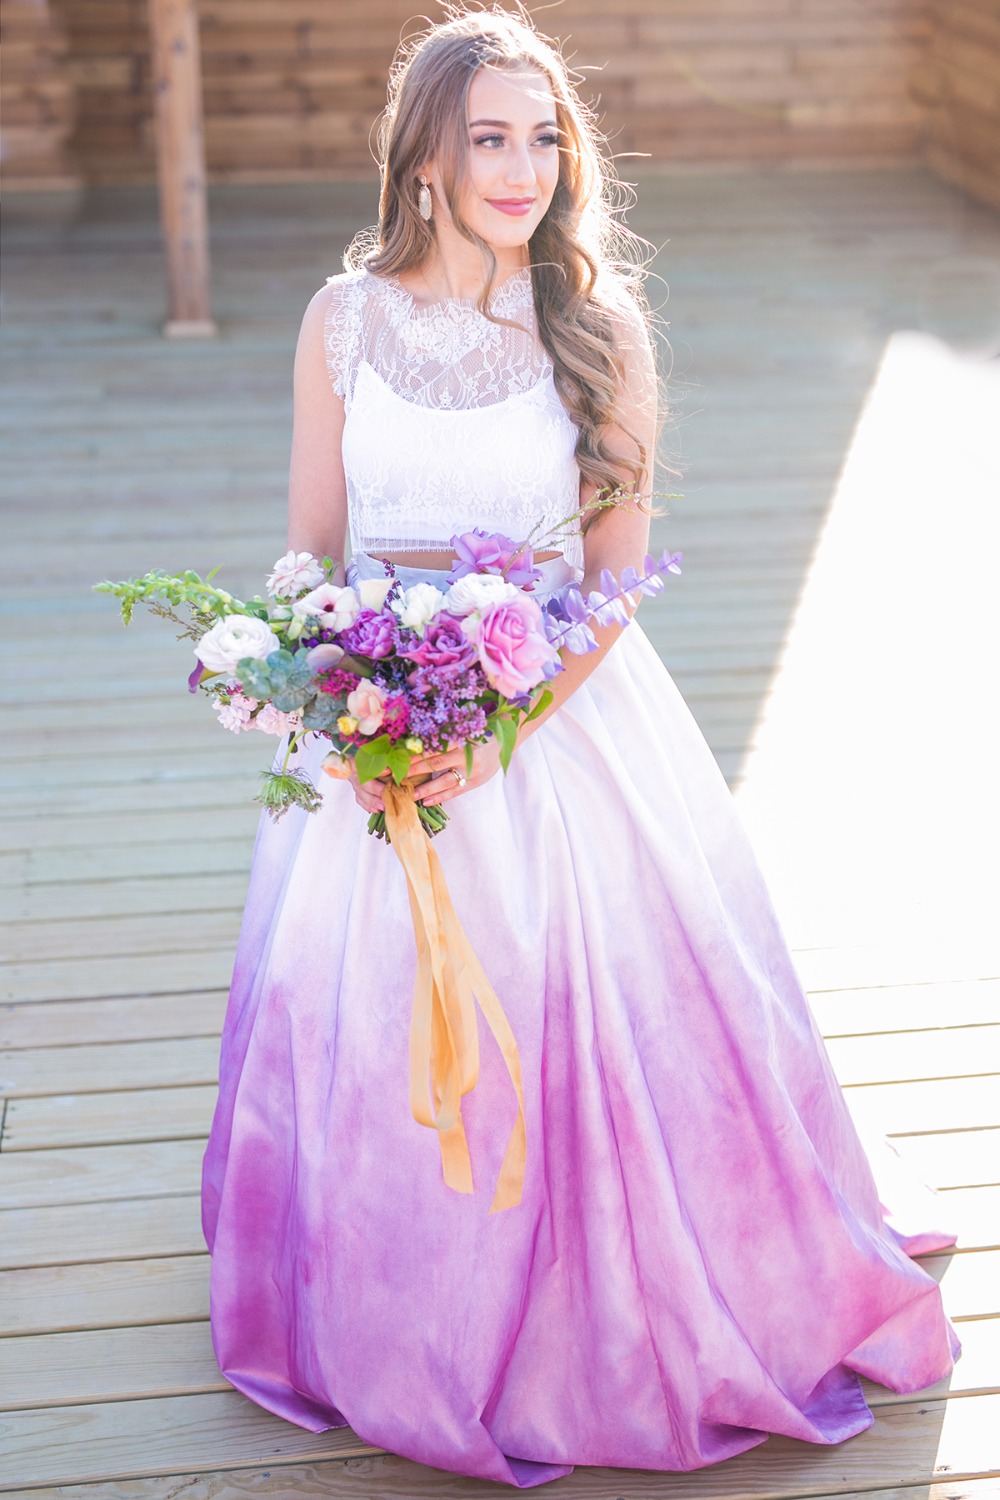 How To Have A Neon And UltraViolet Wedding Day